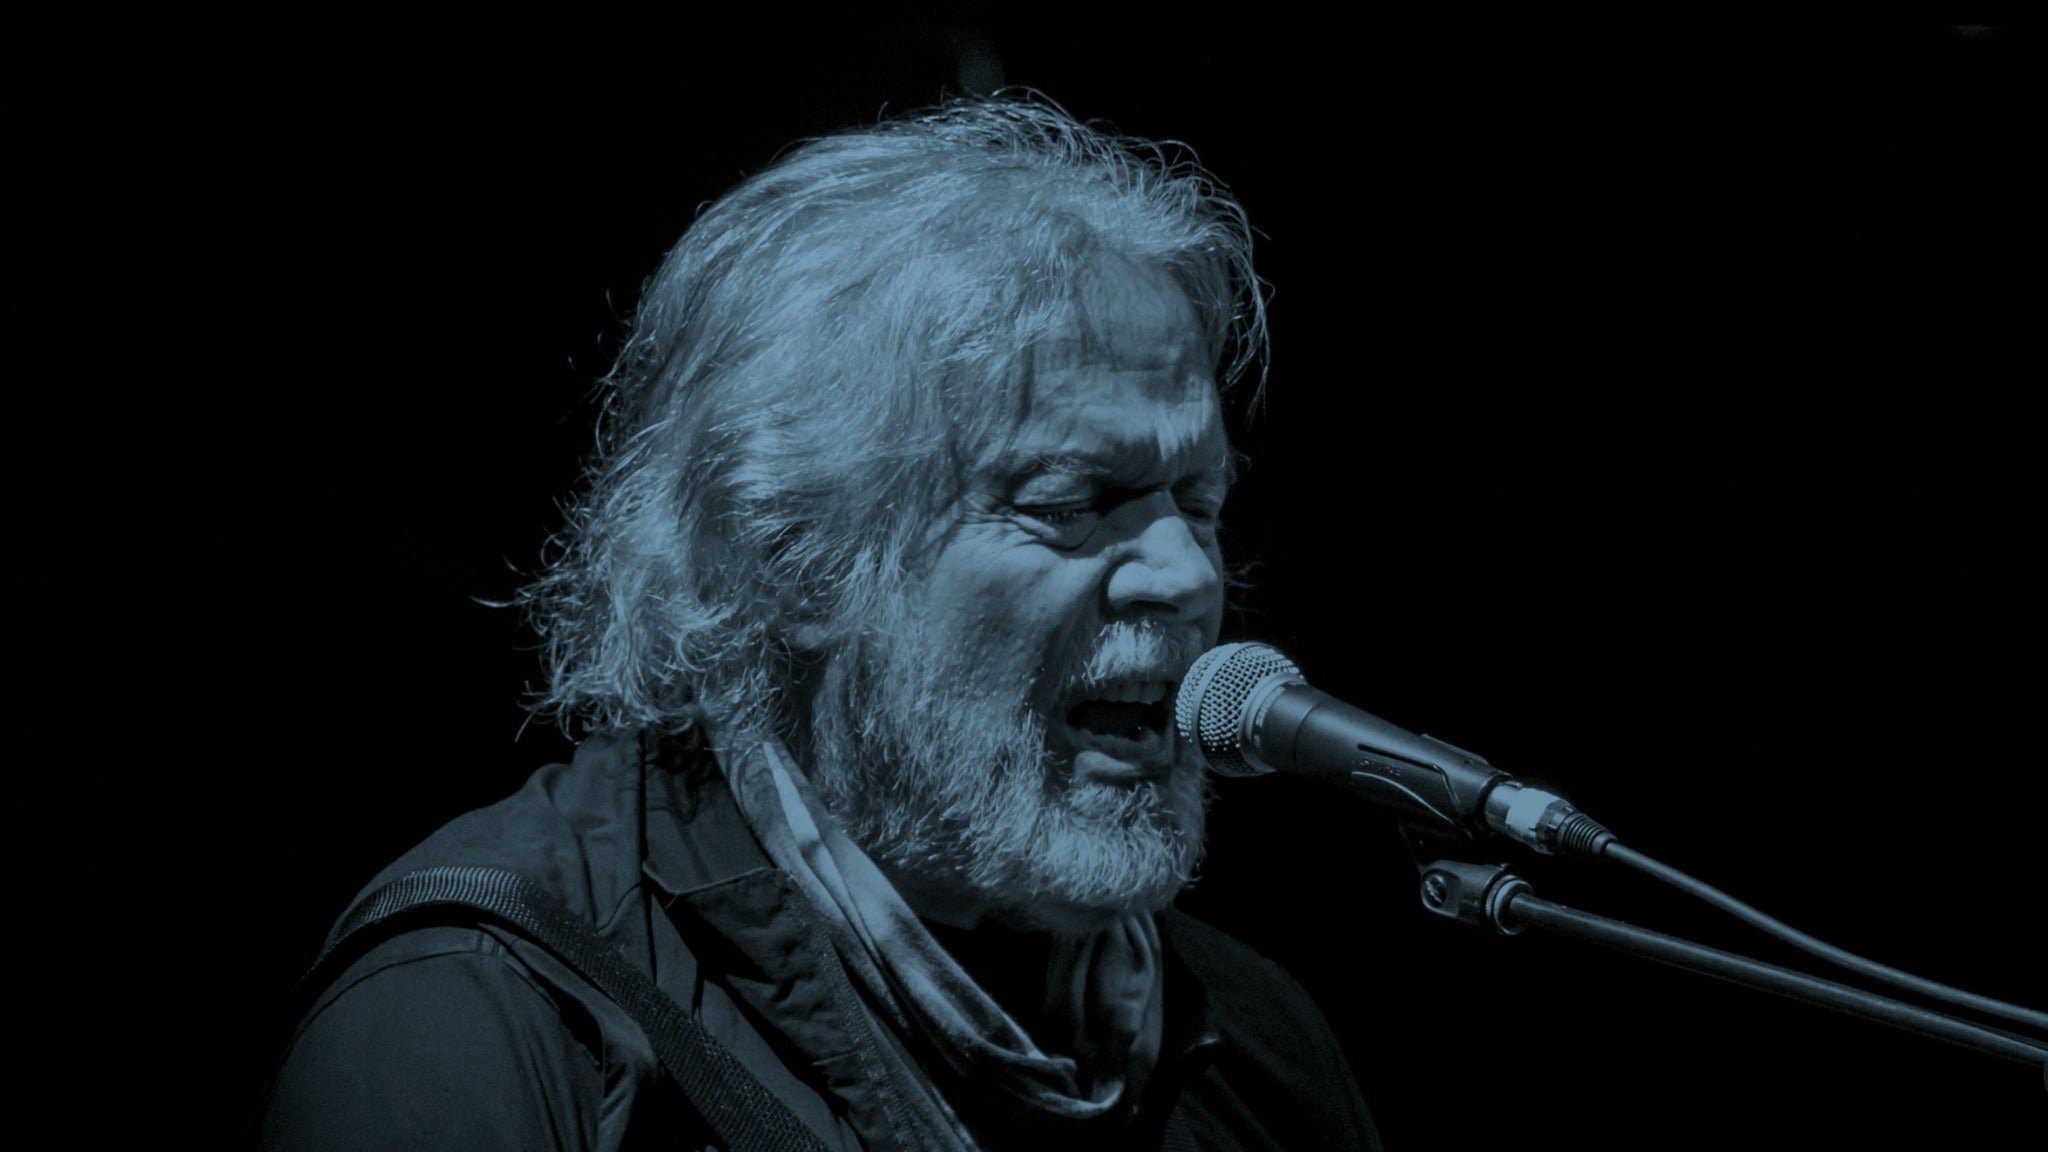 Randy Bachman presale code for show tickets in Winnipeg, MB (Club Regent Event Centre)